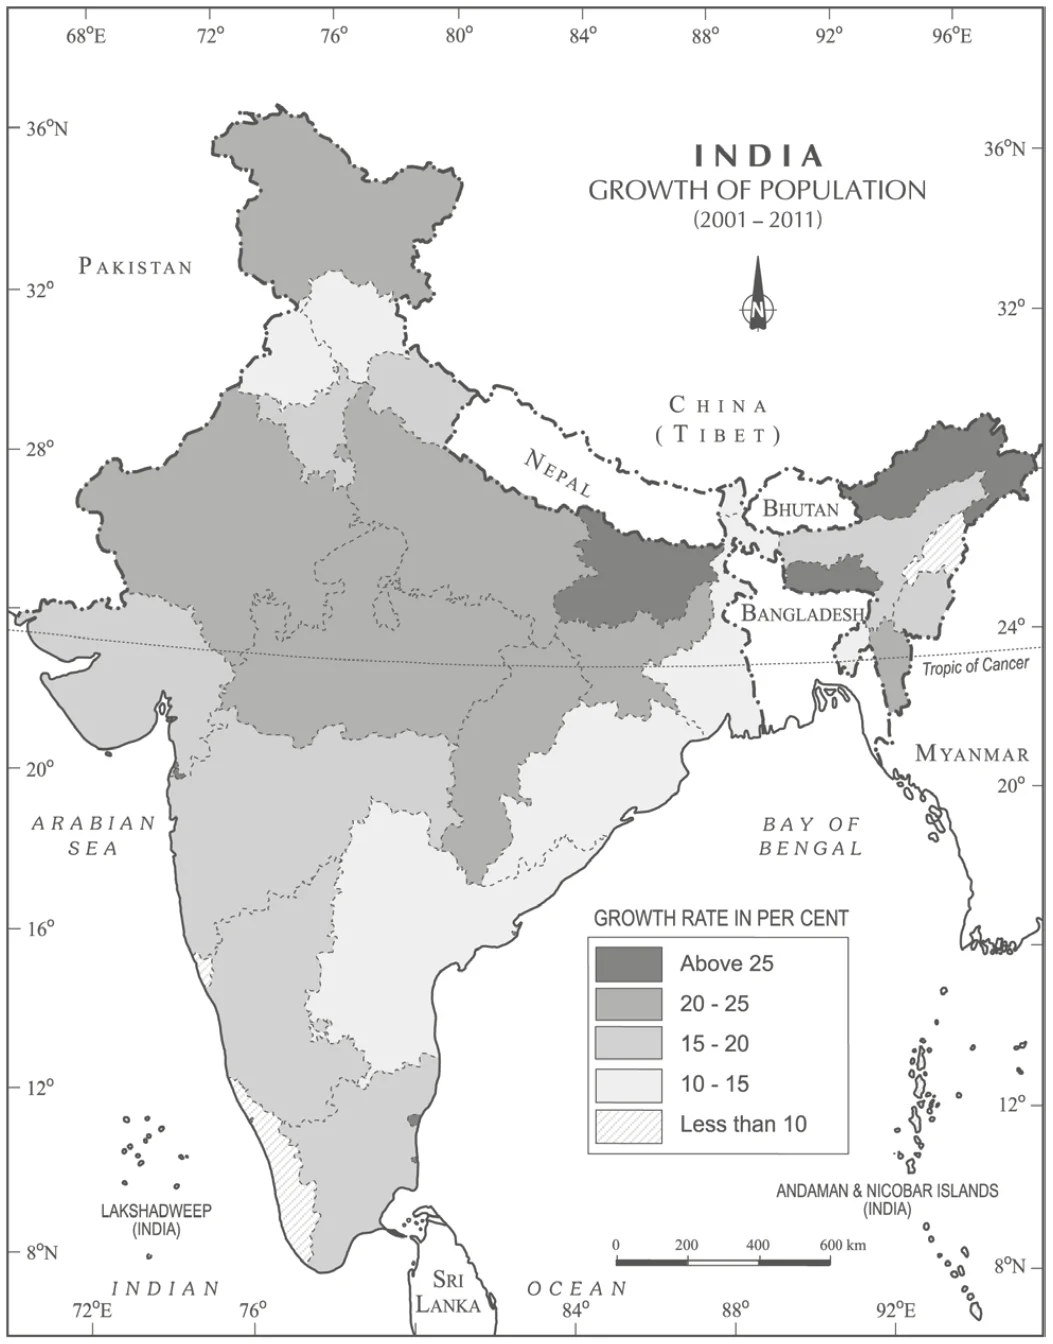 India - Growth of Population